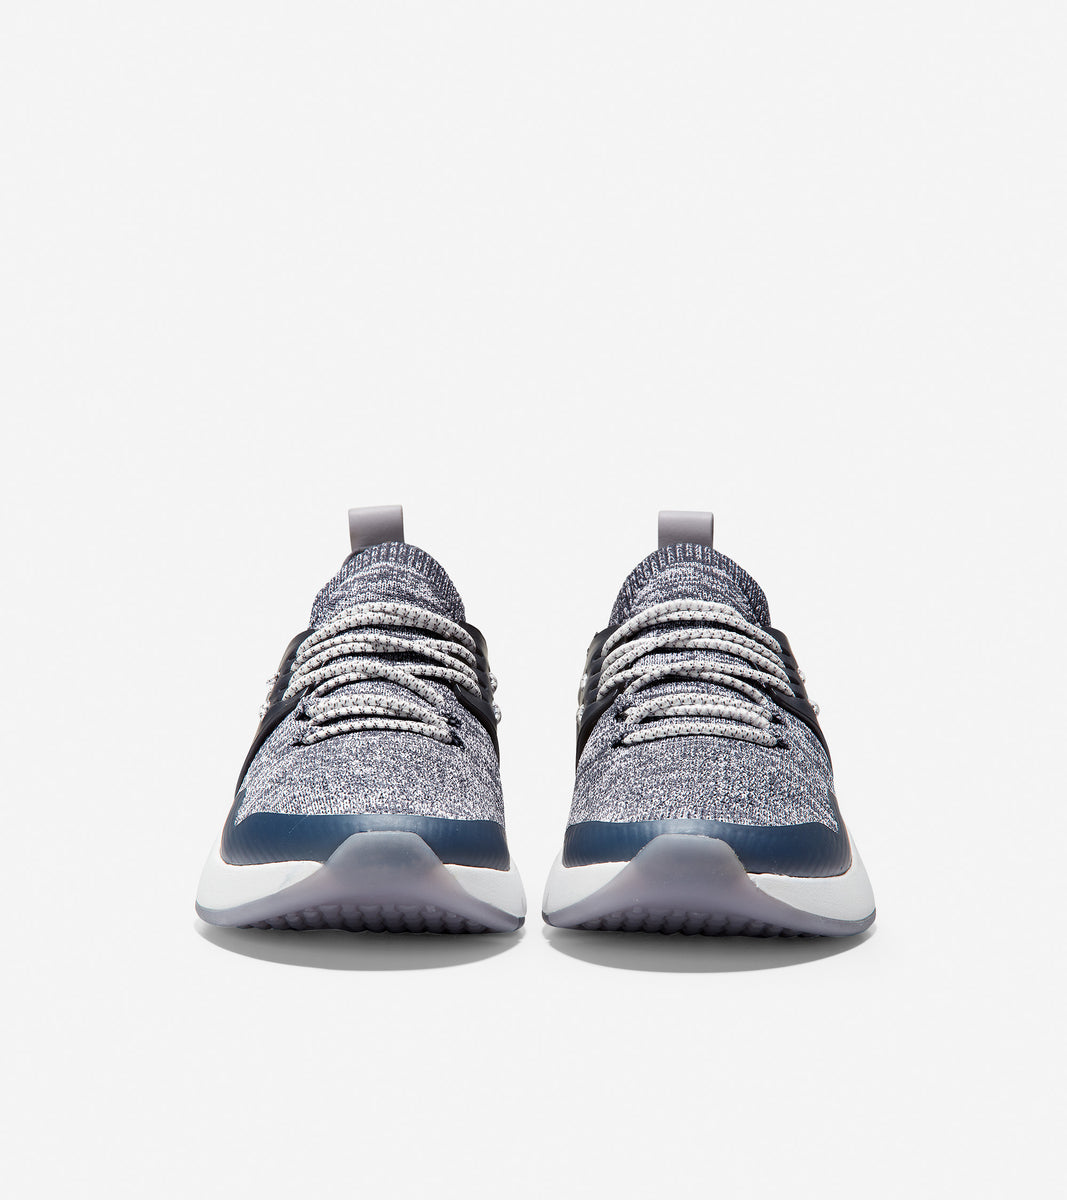 ColeHaan-ZERØGRAND All-Day Trainer-w15474-Ombre Blue Stitchlite™